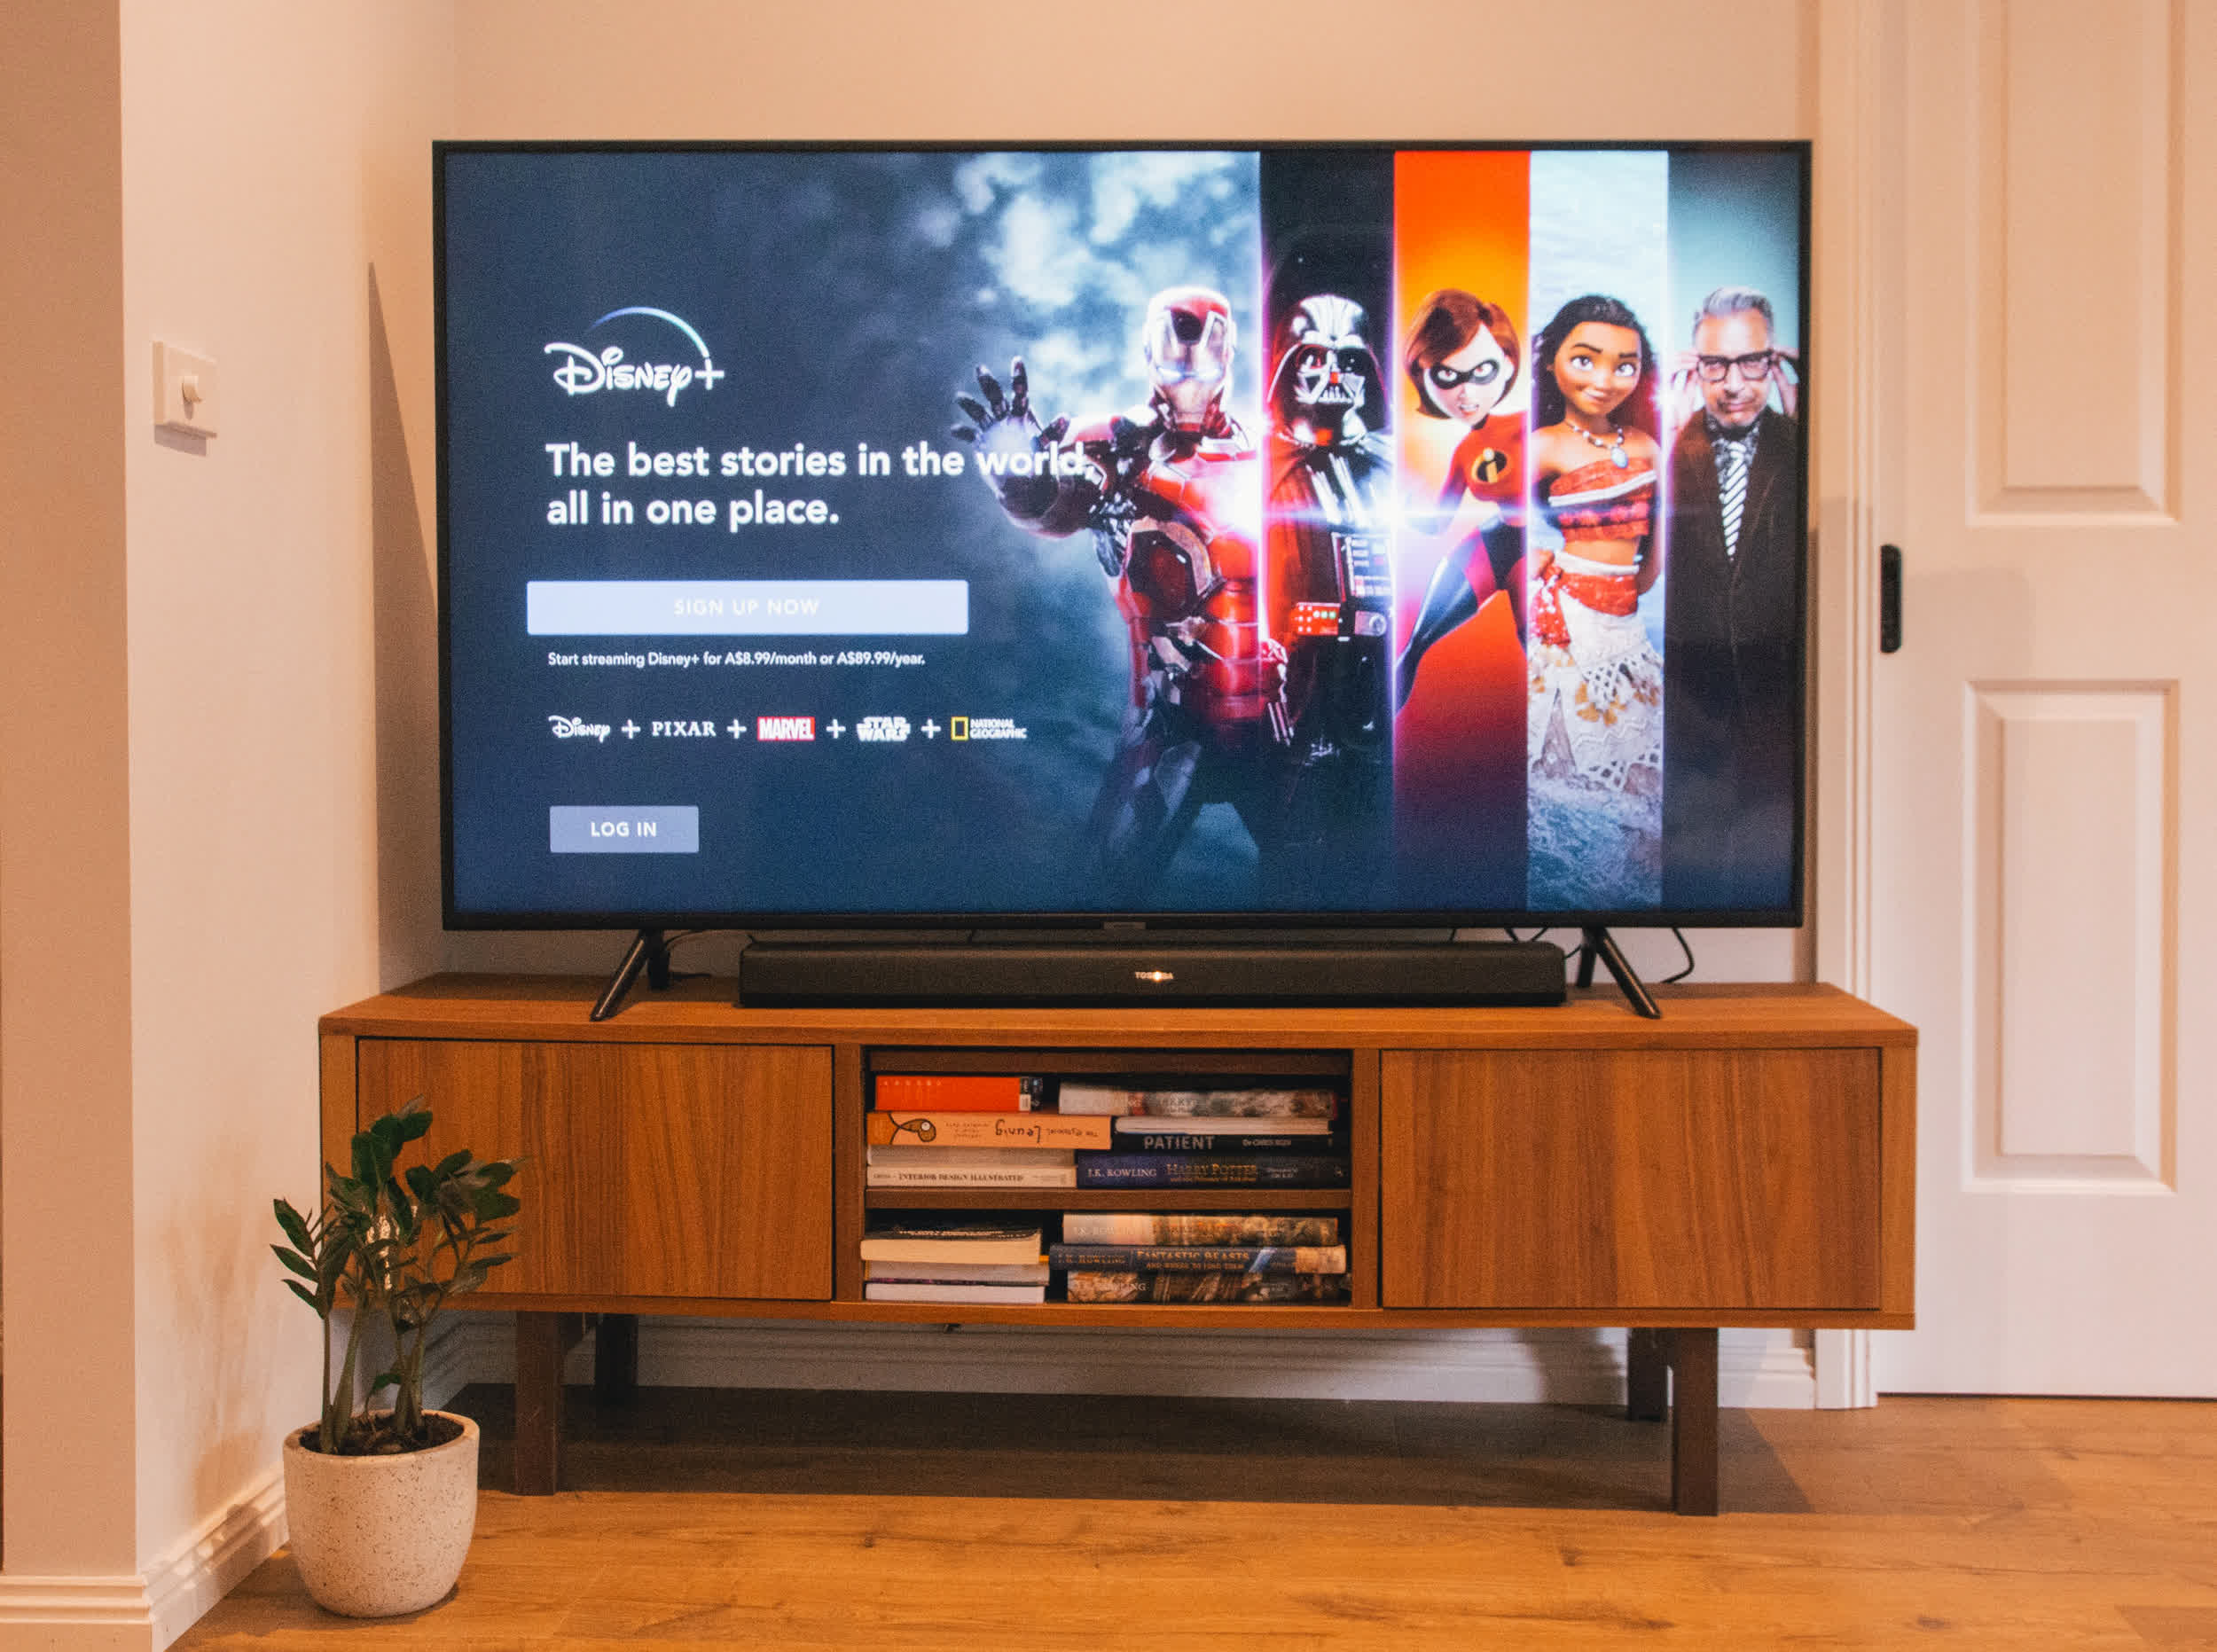 Disney+ will get an ad-supported tier later this year